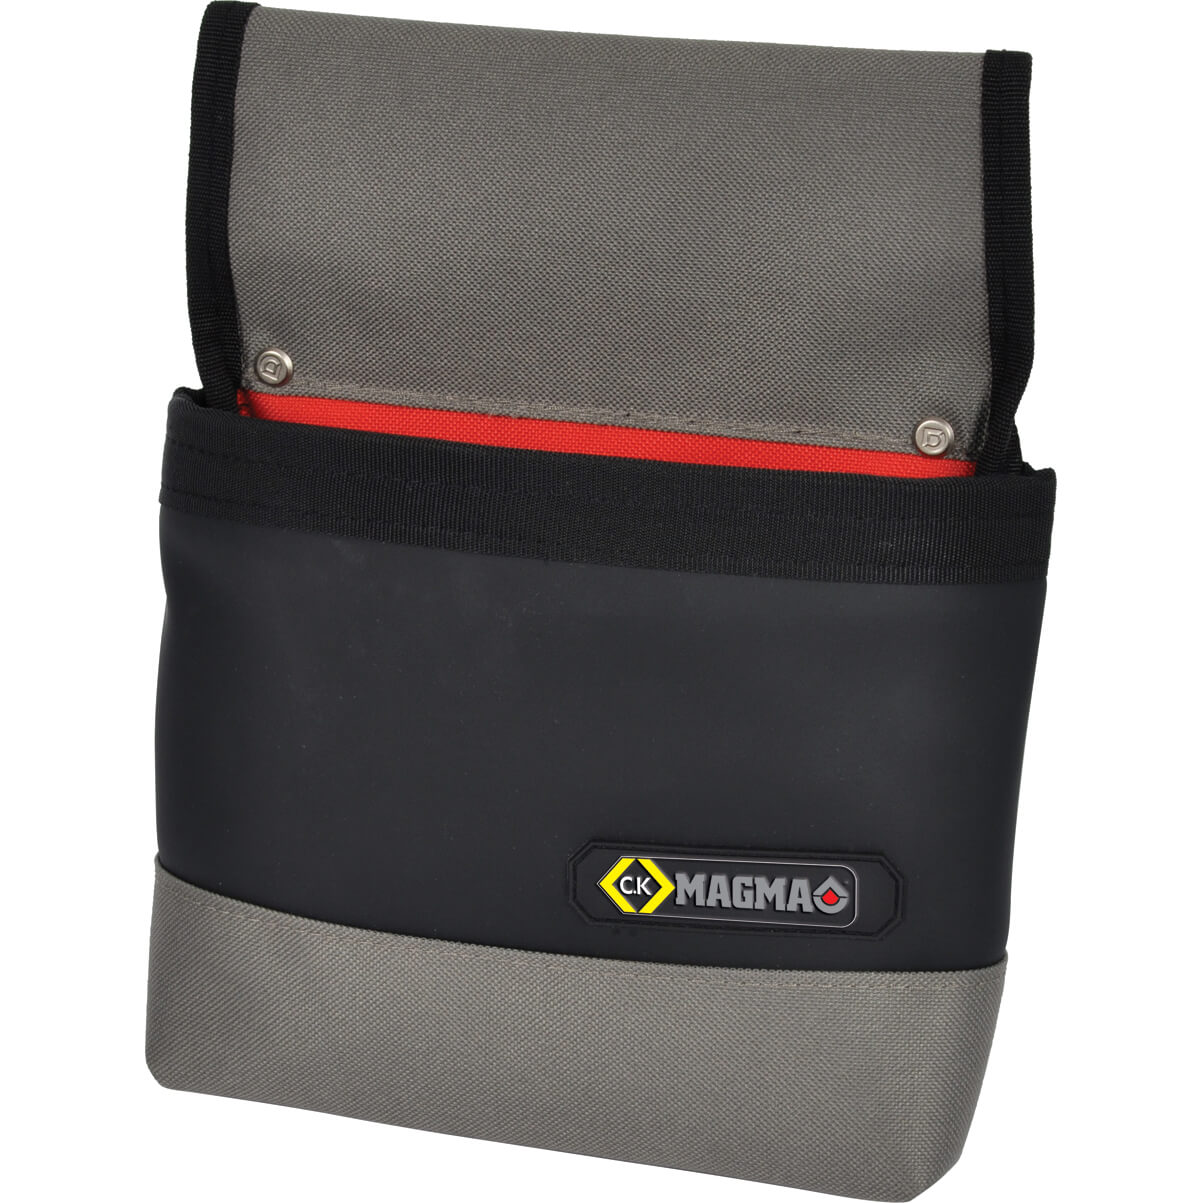 Image of CK Magma Nail Pouch